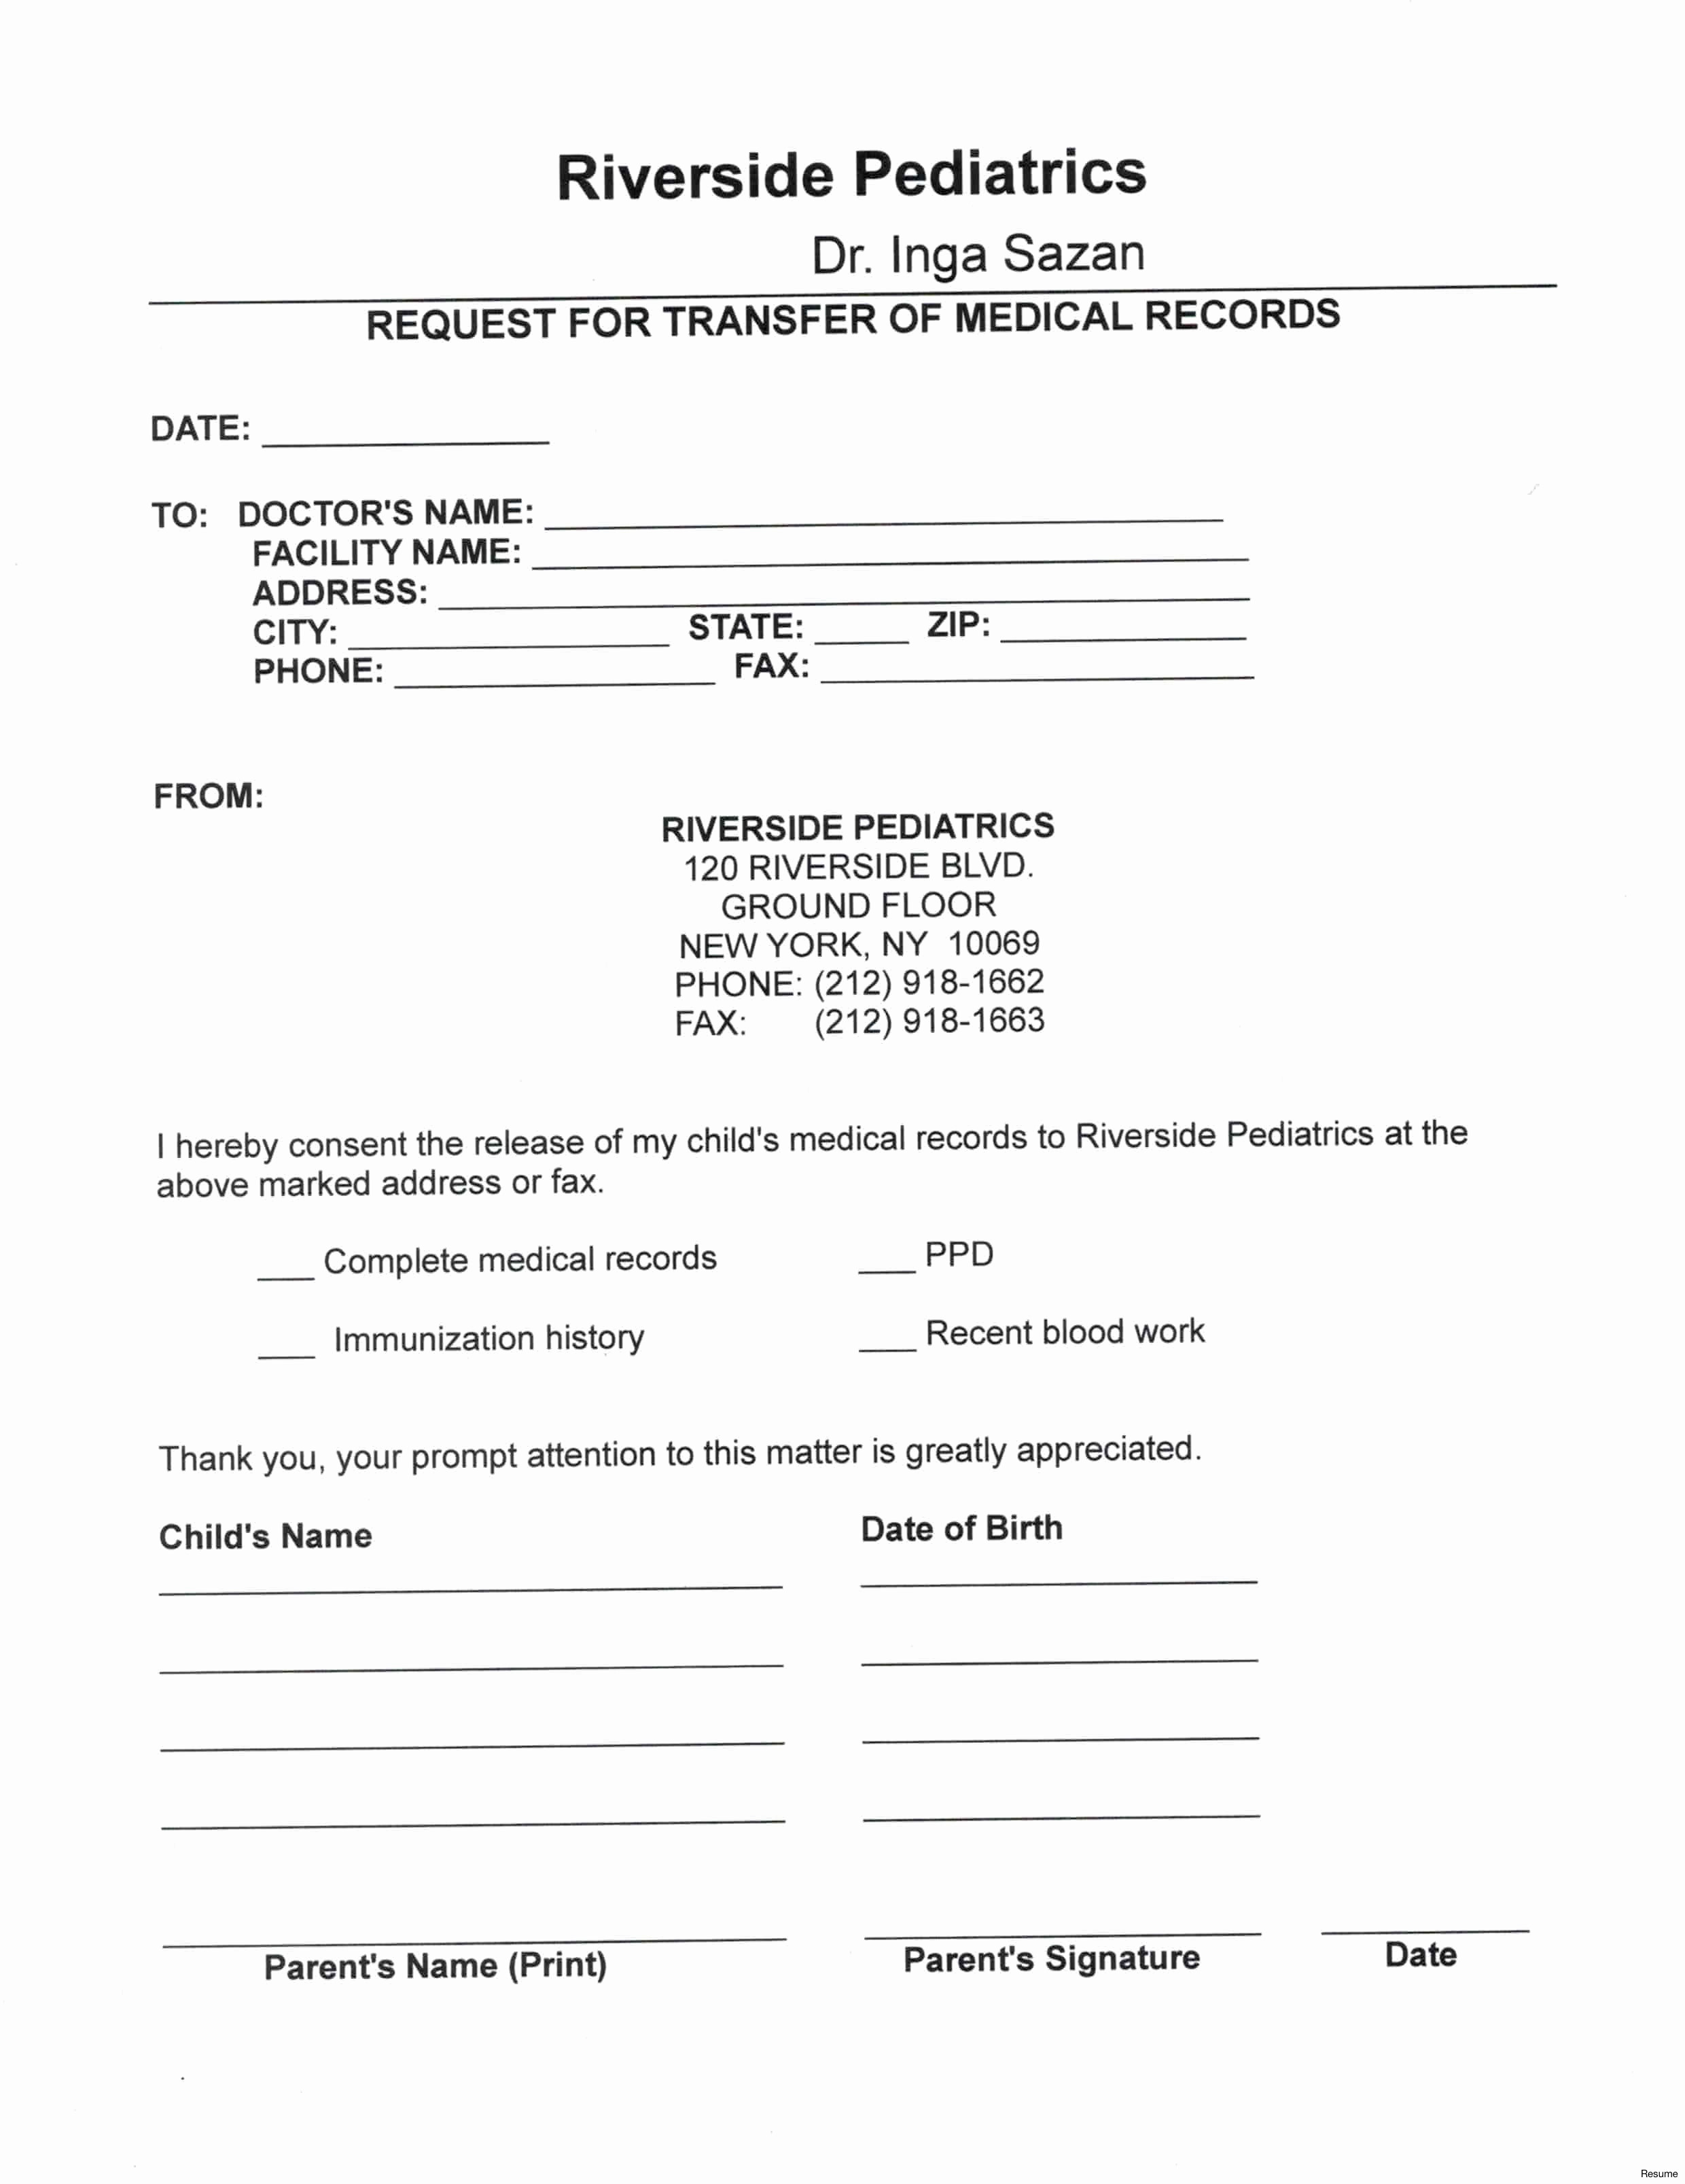 request-for-medical-records-template-letter-samples-letter-template